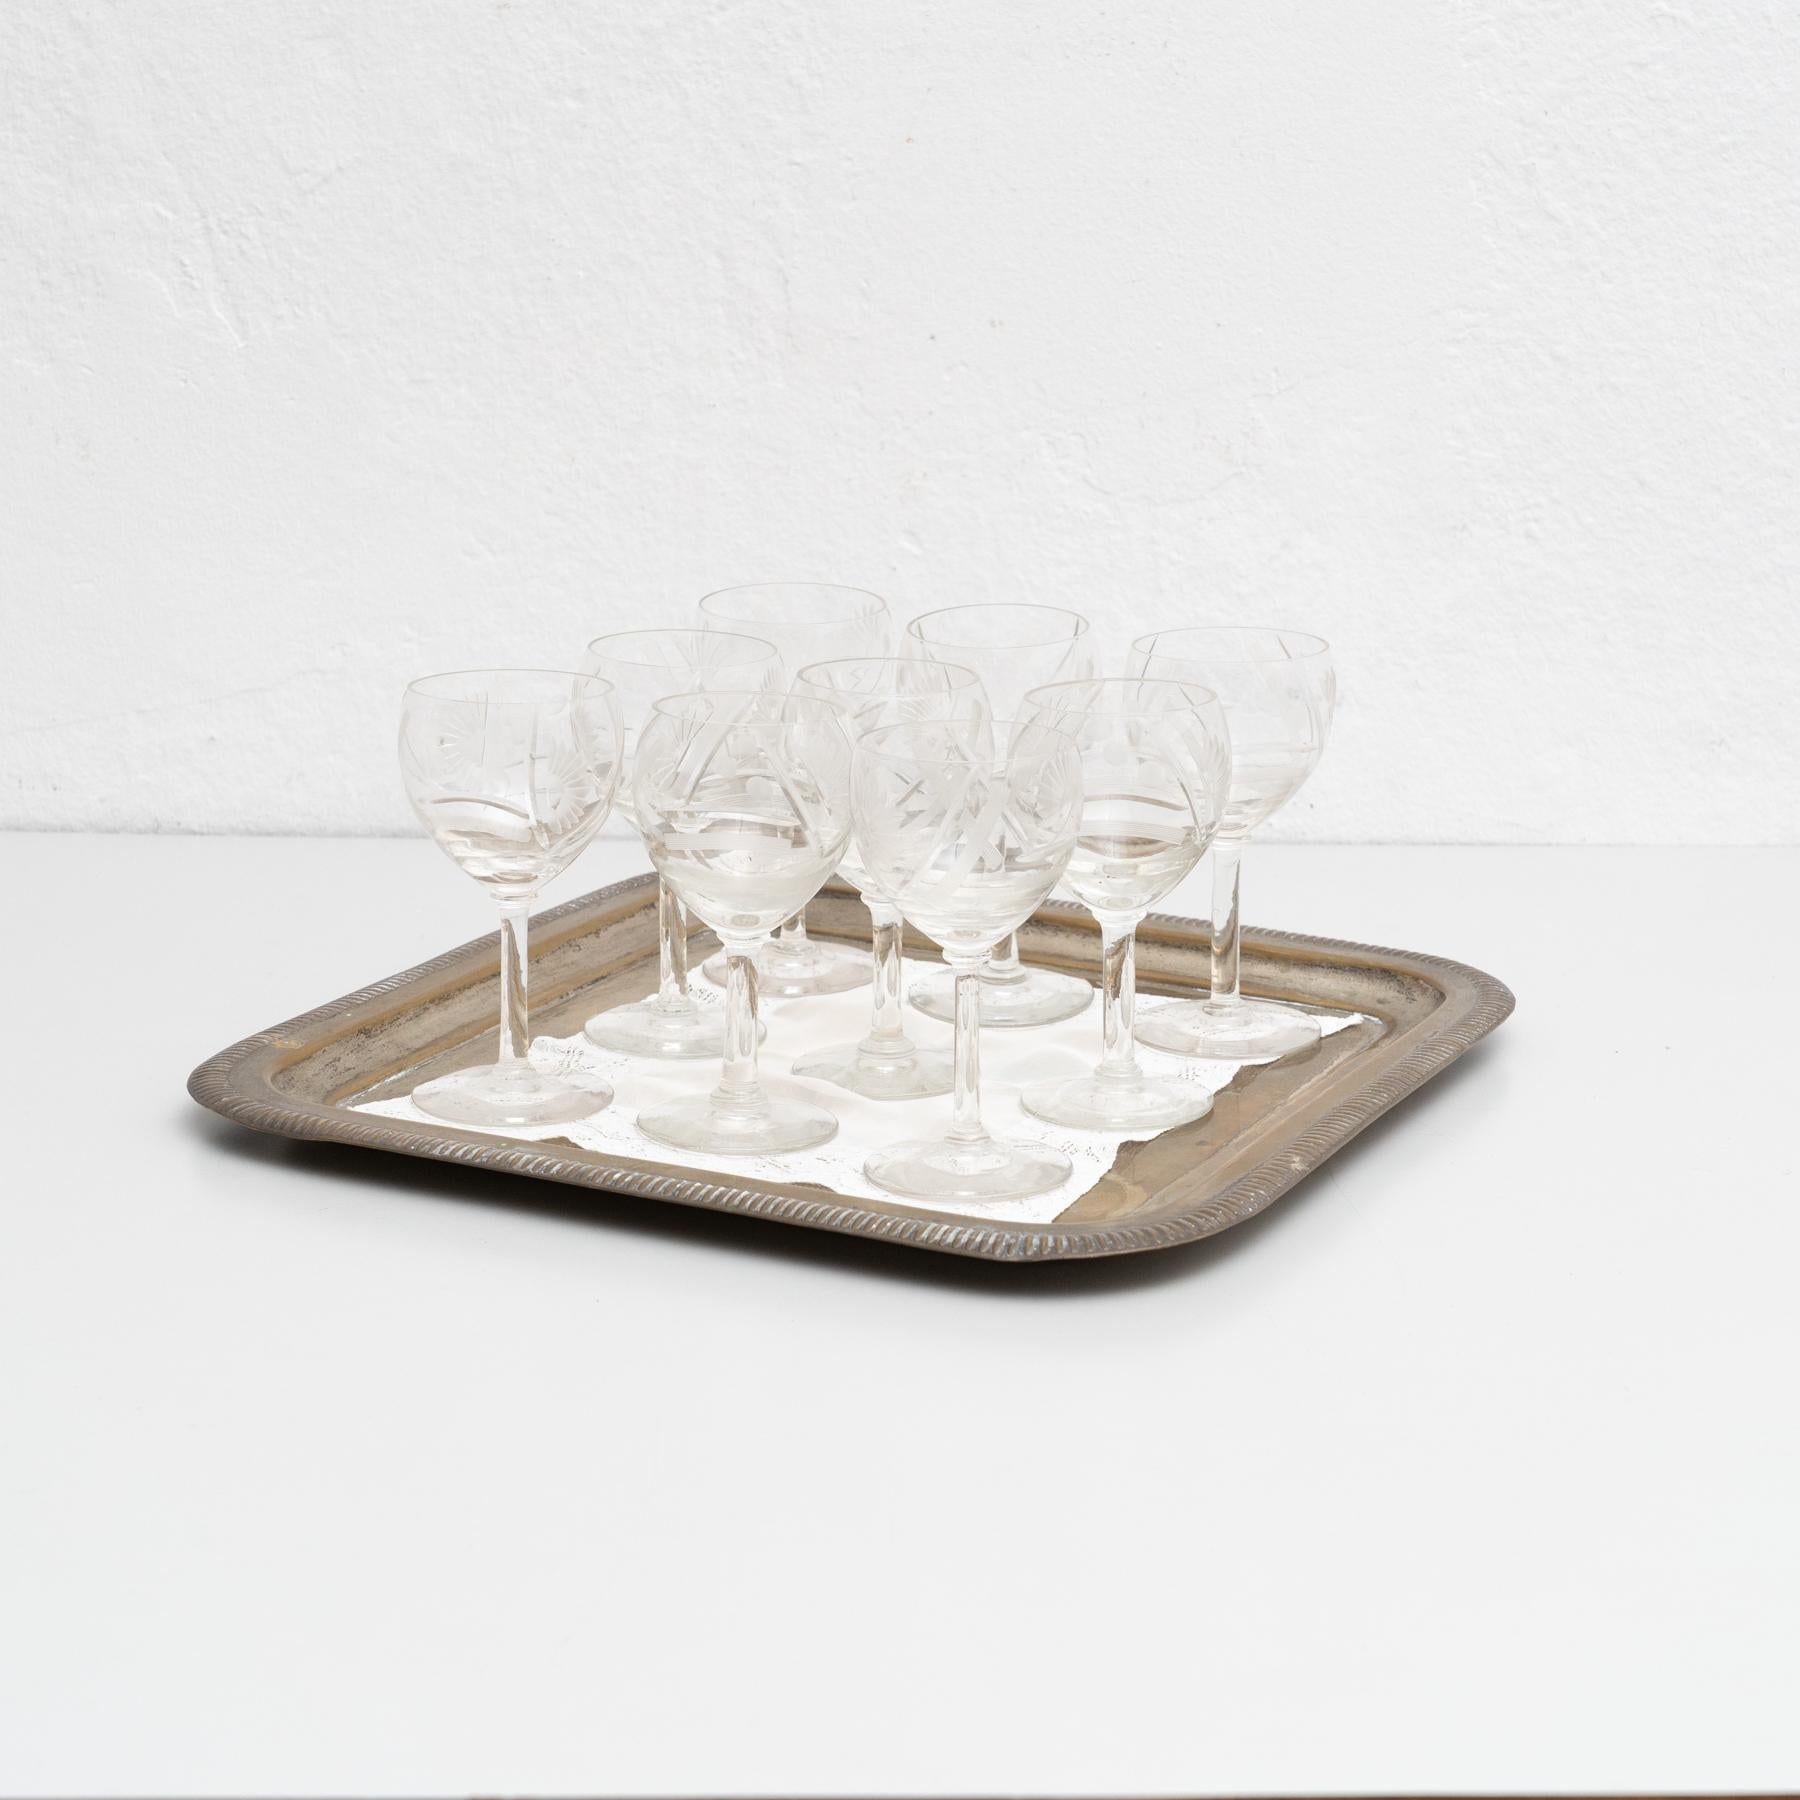 Antique French set of 9 glass wine cups on a brass tray.

Made by unknown manufacturer in France, circa 1950.

In original condition, with minor wear consistent with age and use, preserving a beautiful